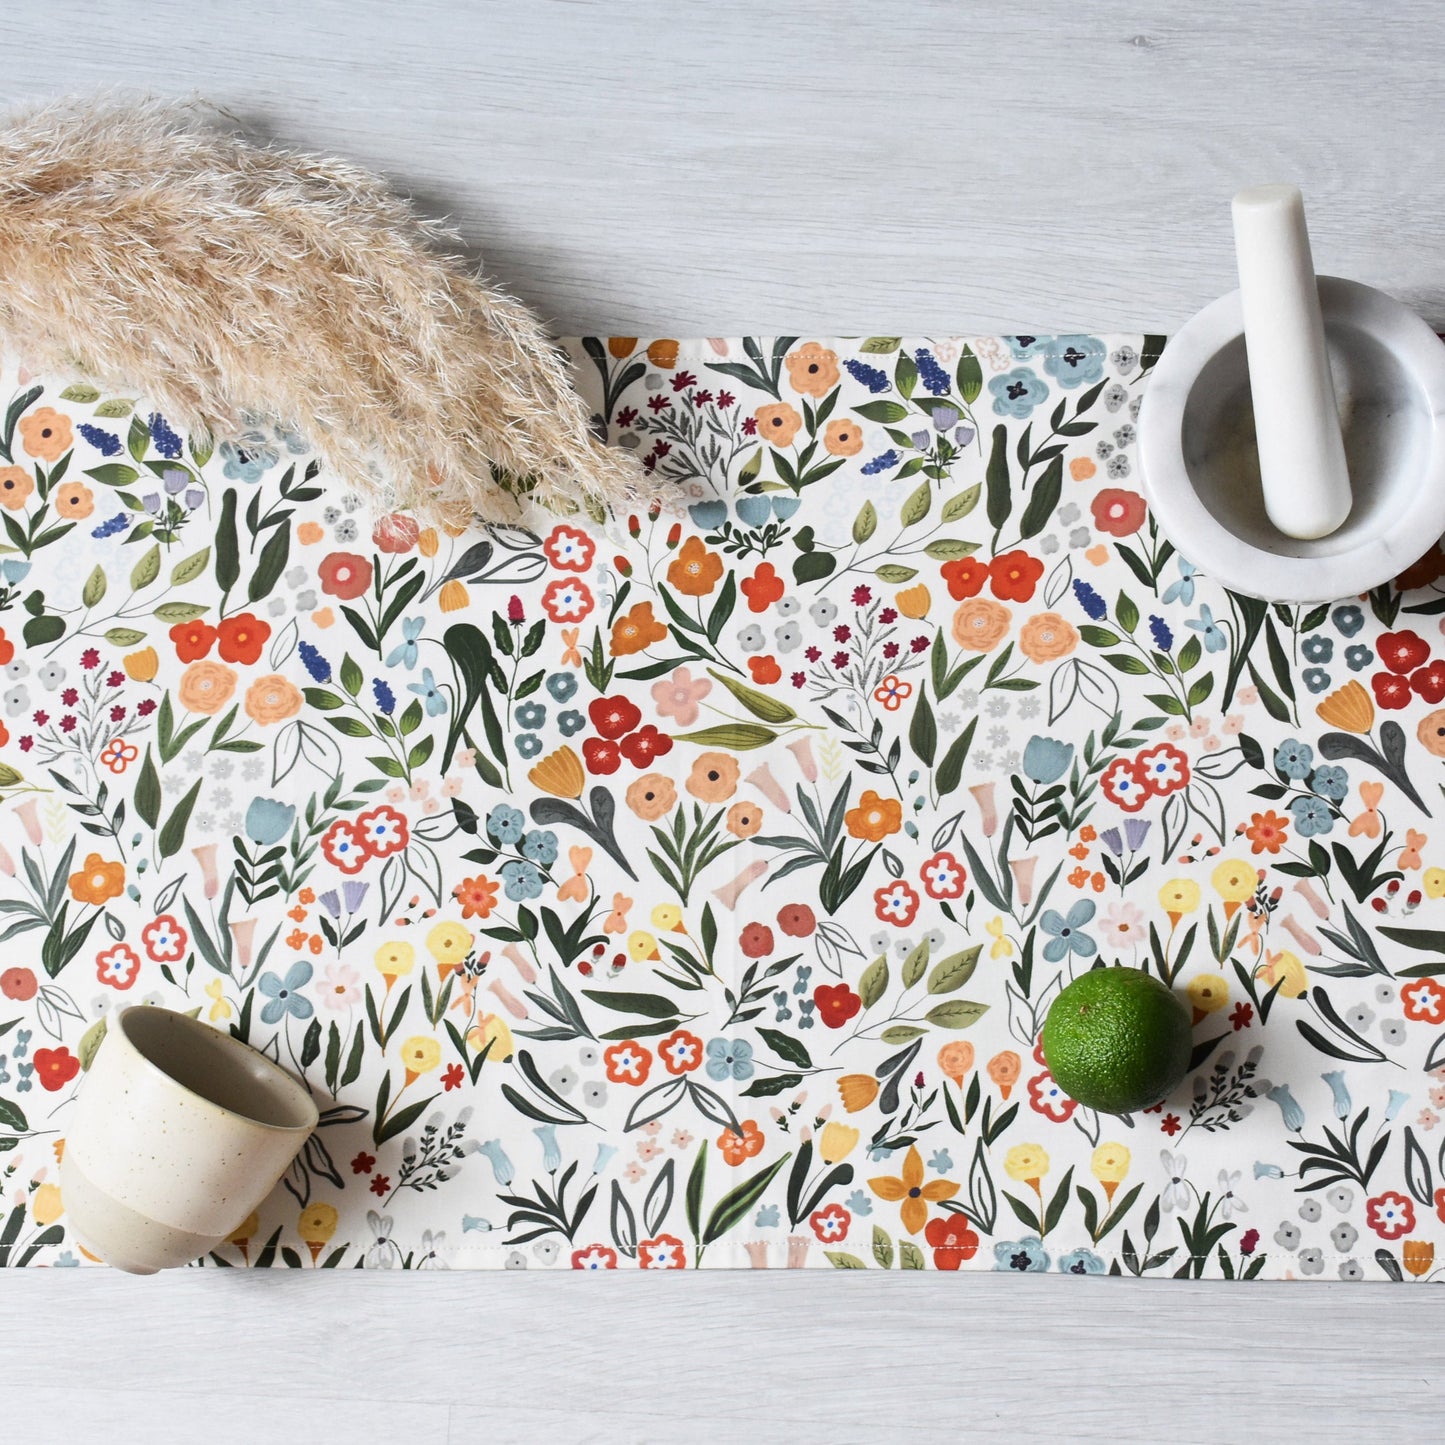 Table runner - Floral